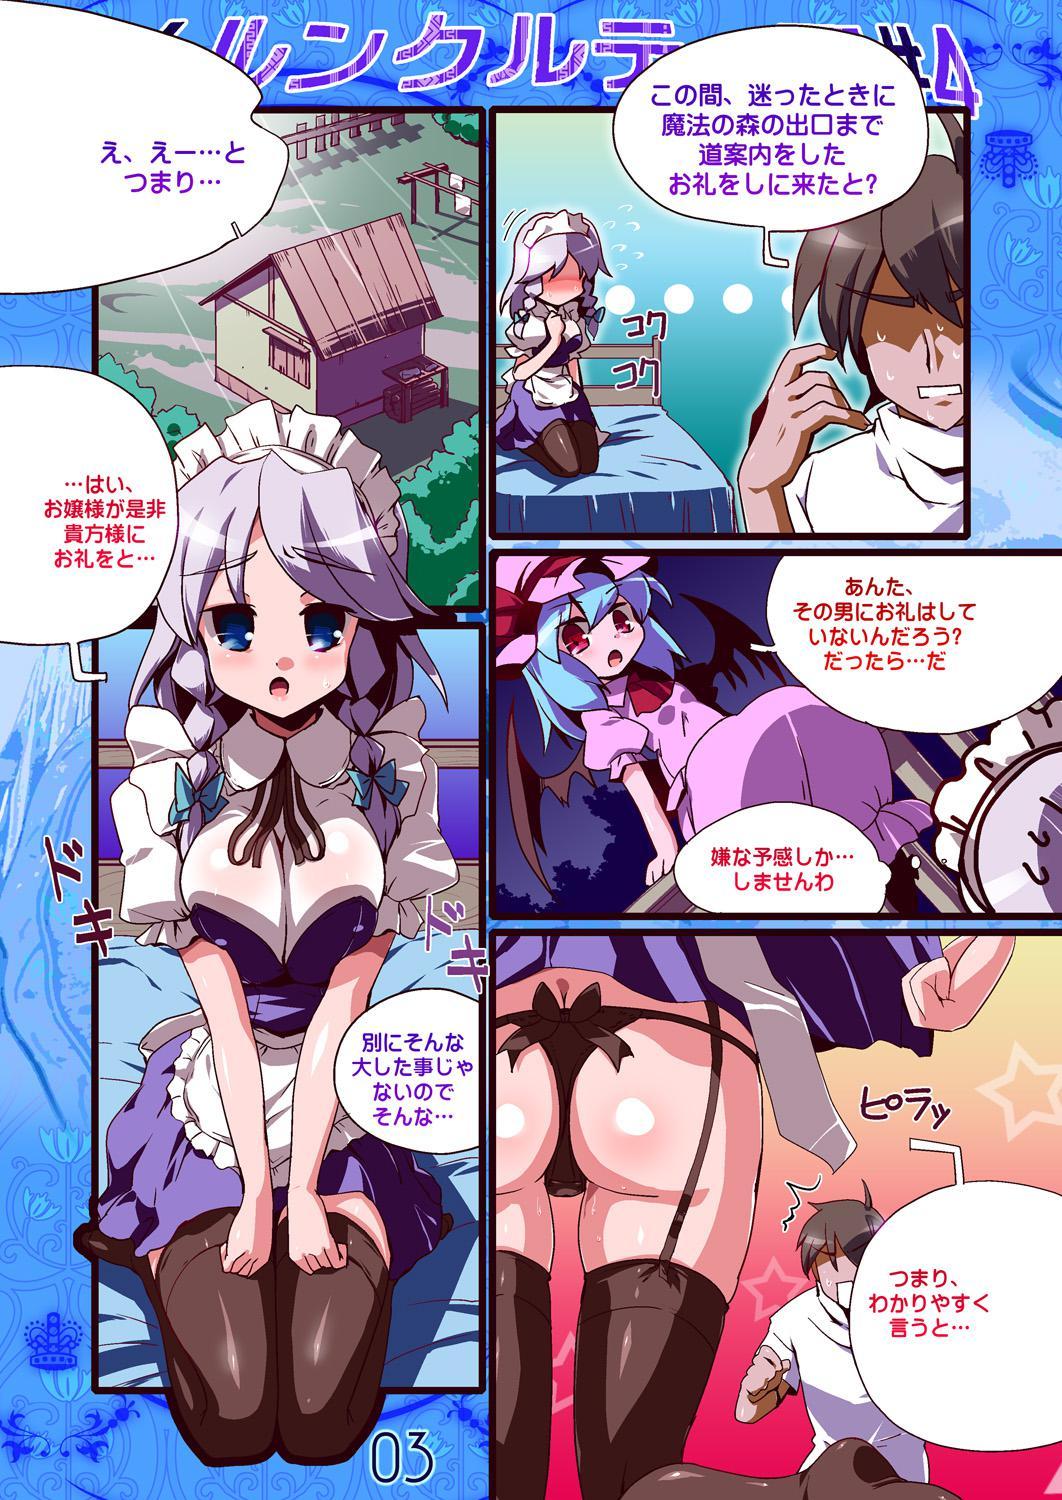 Free Fucking Merun Culture #4 - Touhou project Fisting - Page 3